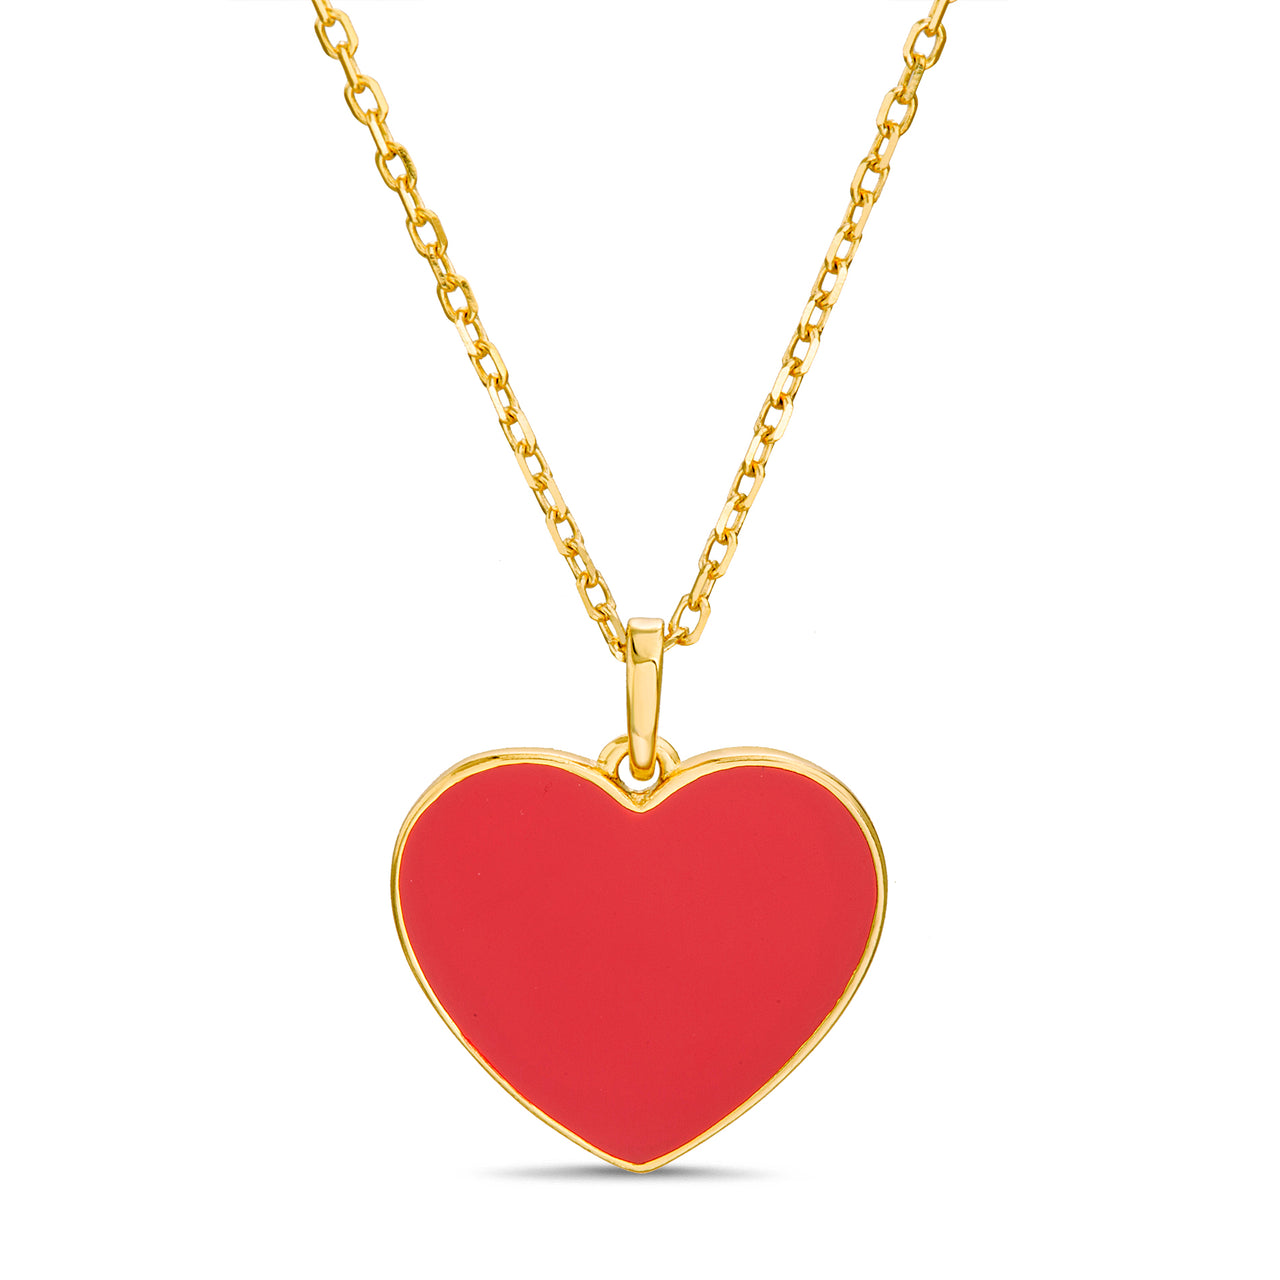 Lesa Michele Yellow Gold Plated Sterling Silver Red Enamel Heart Necklace